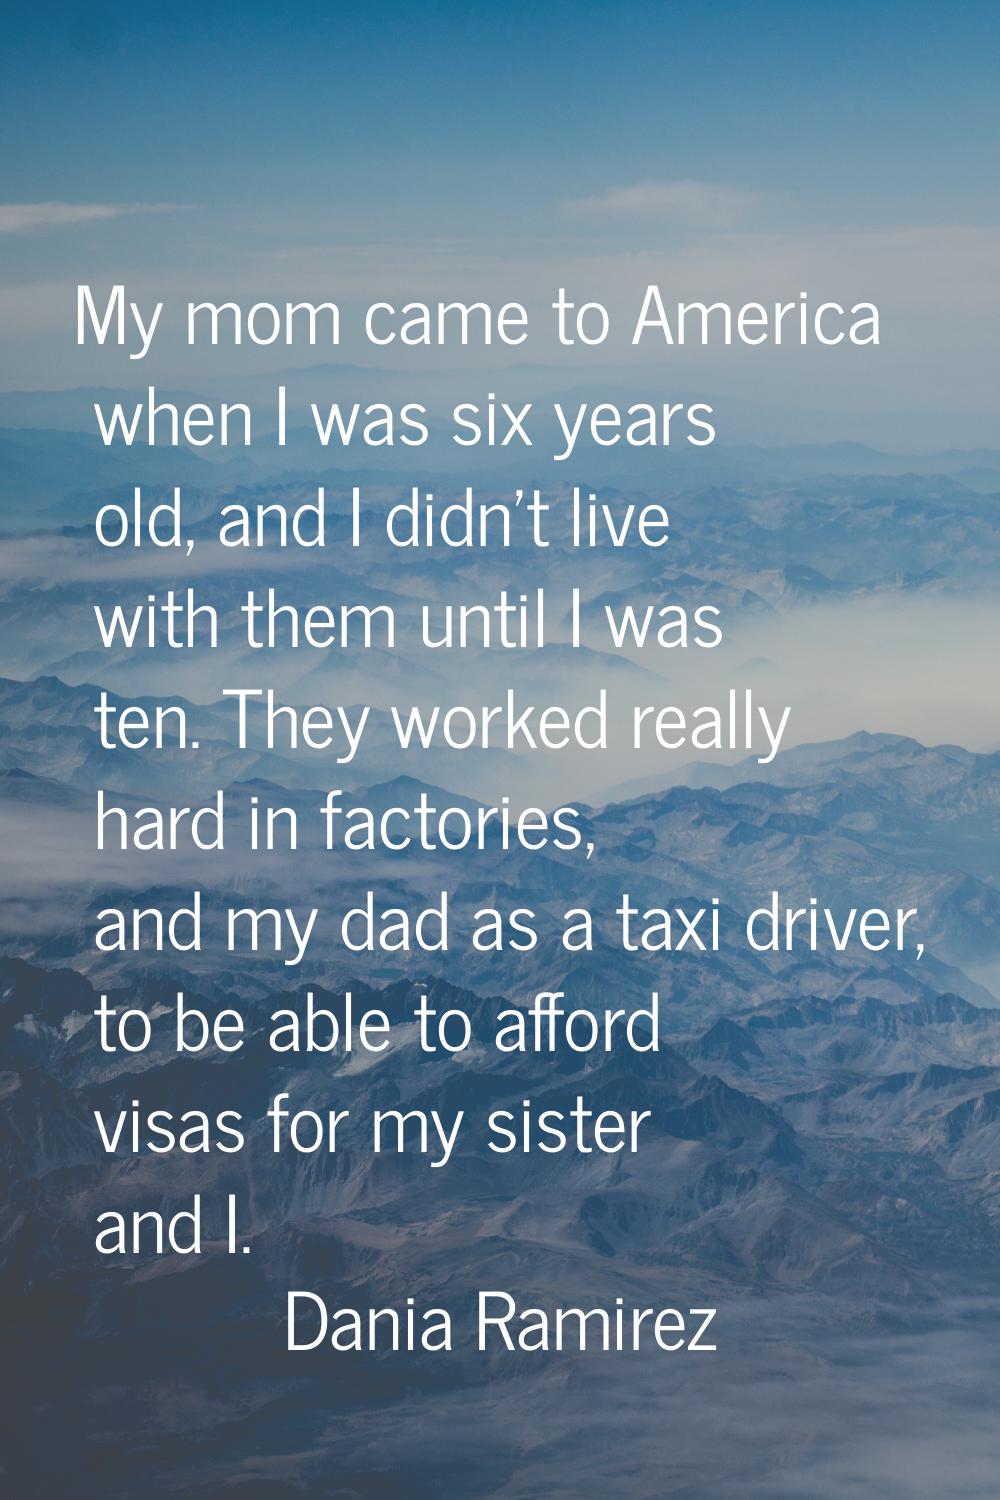 My mom came to America when I was six years old, and I didn't live with them until I was ten. They 